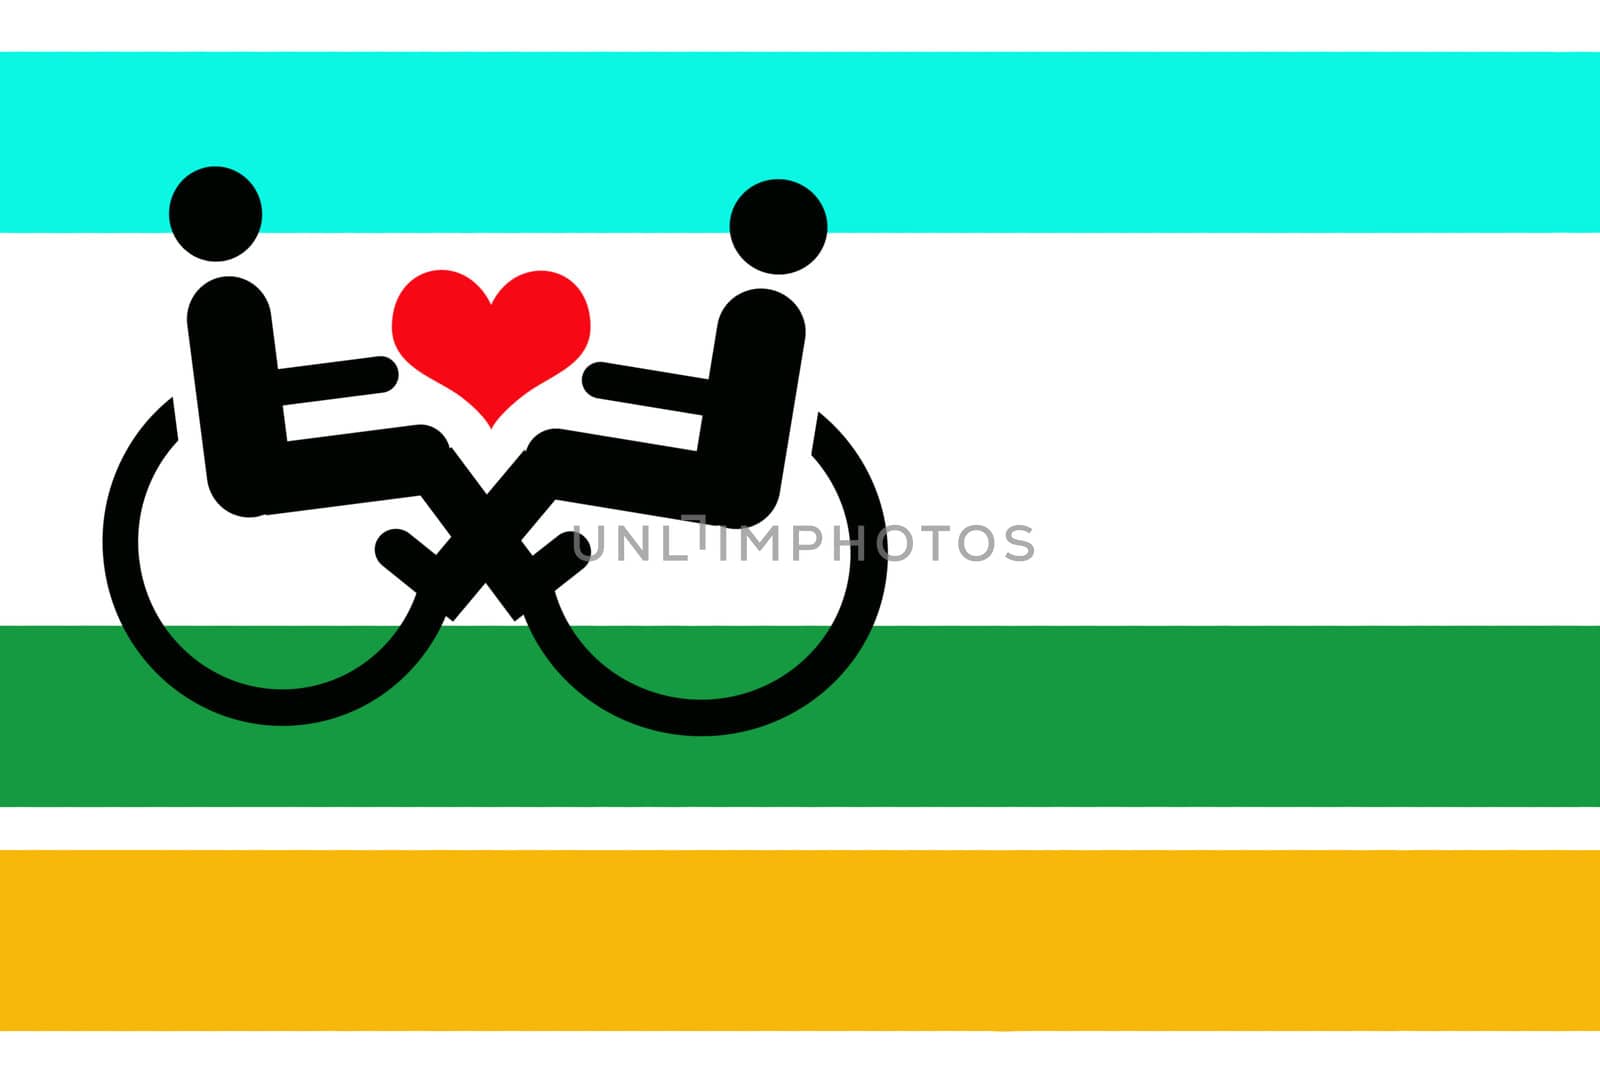 abstract creative symbolic image of relations between disabled persons and their protection